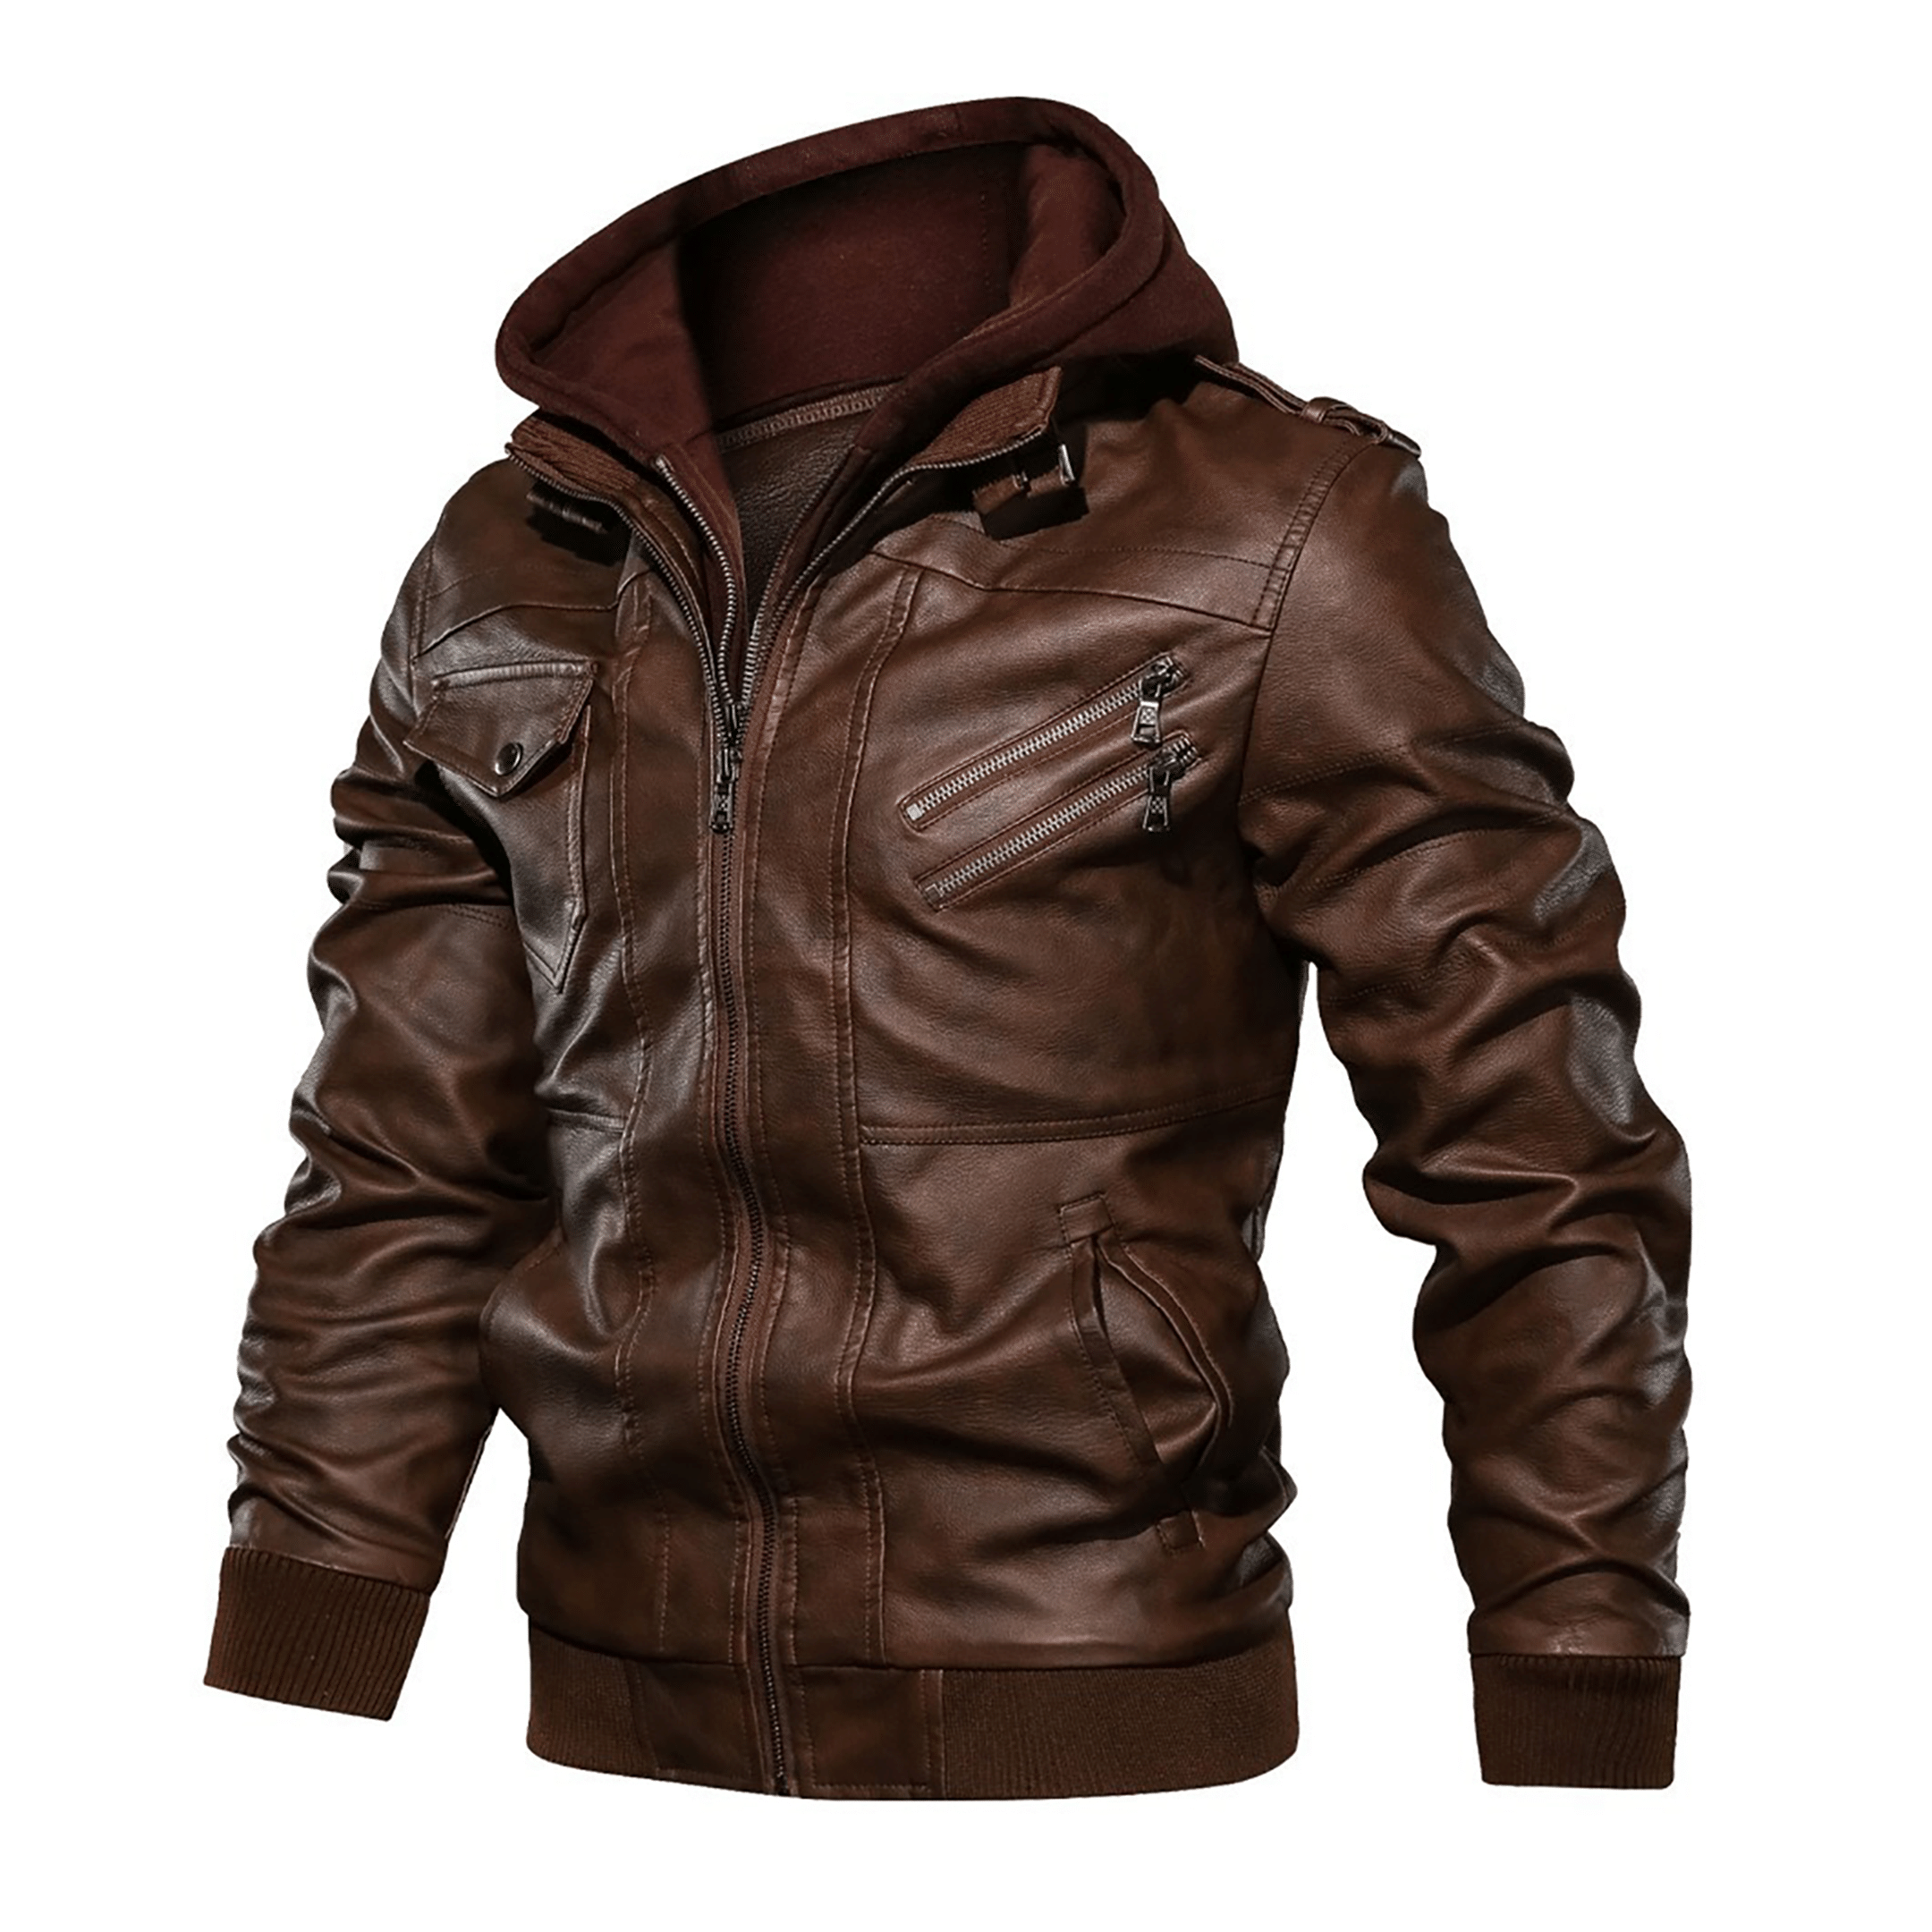 Top leather jackets and latest products 107